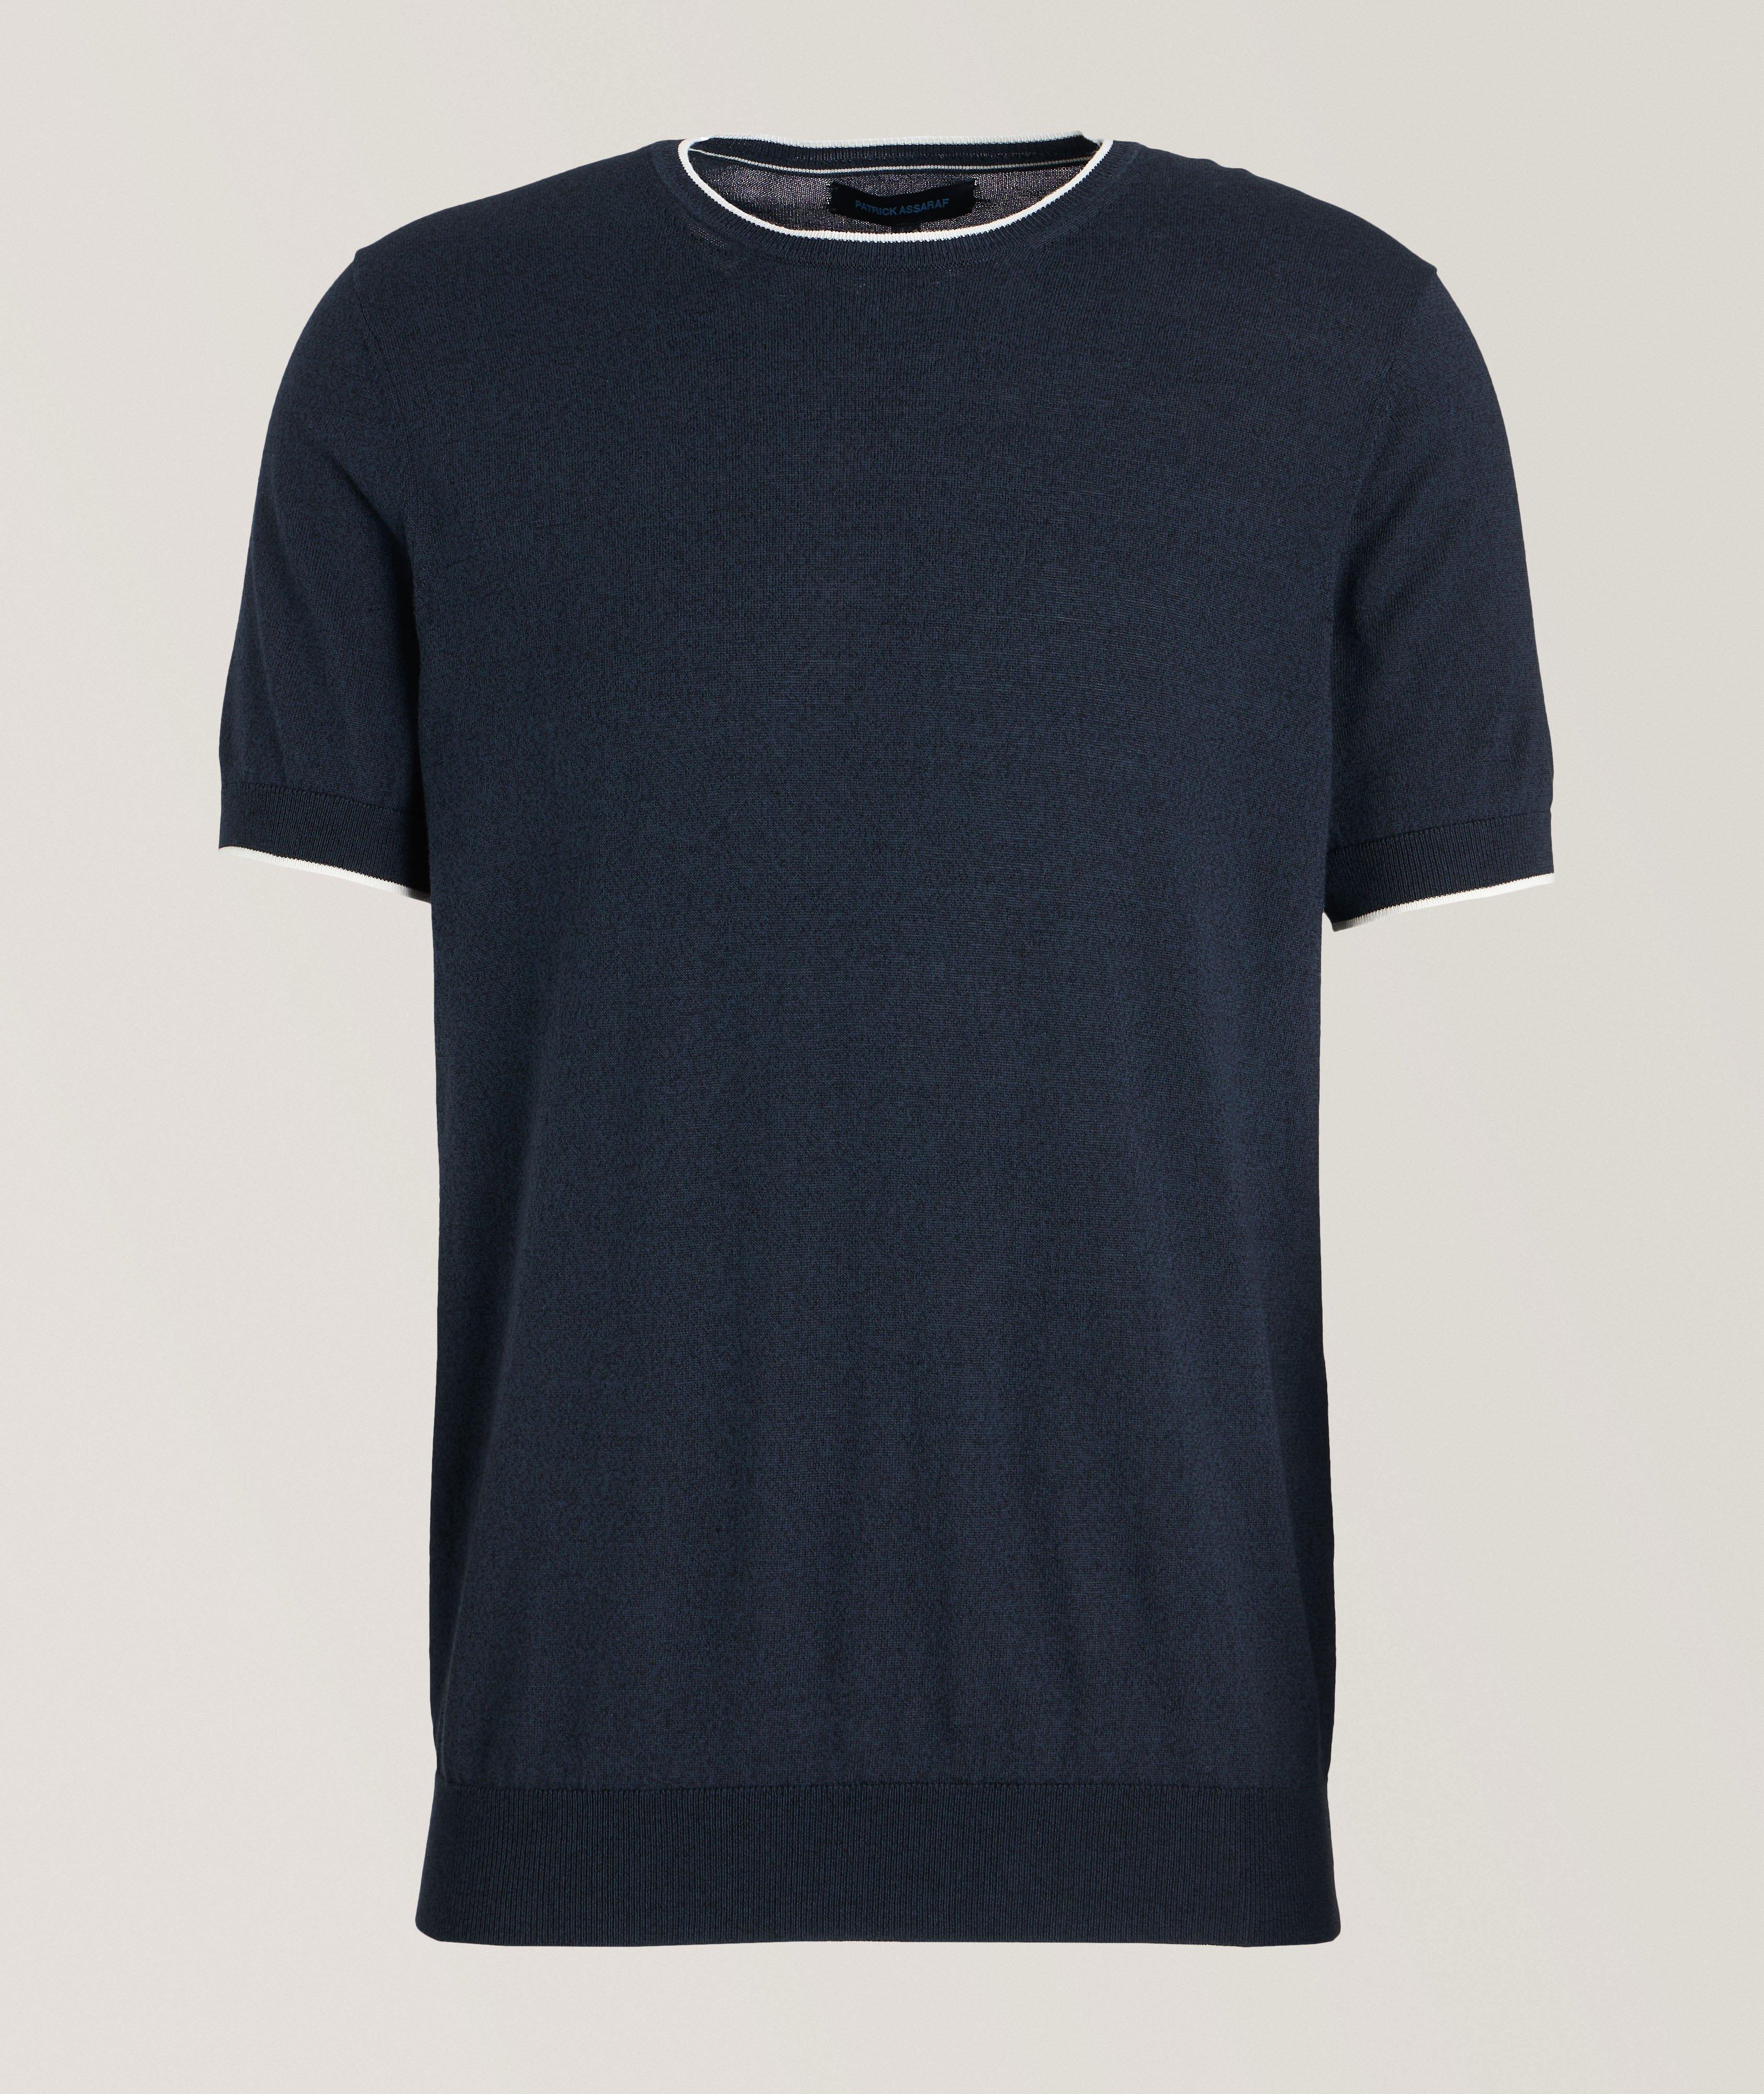 Contrast Tipped Cotton-Blend Knitted T-Shirt image 0